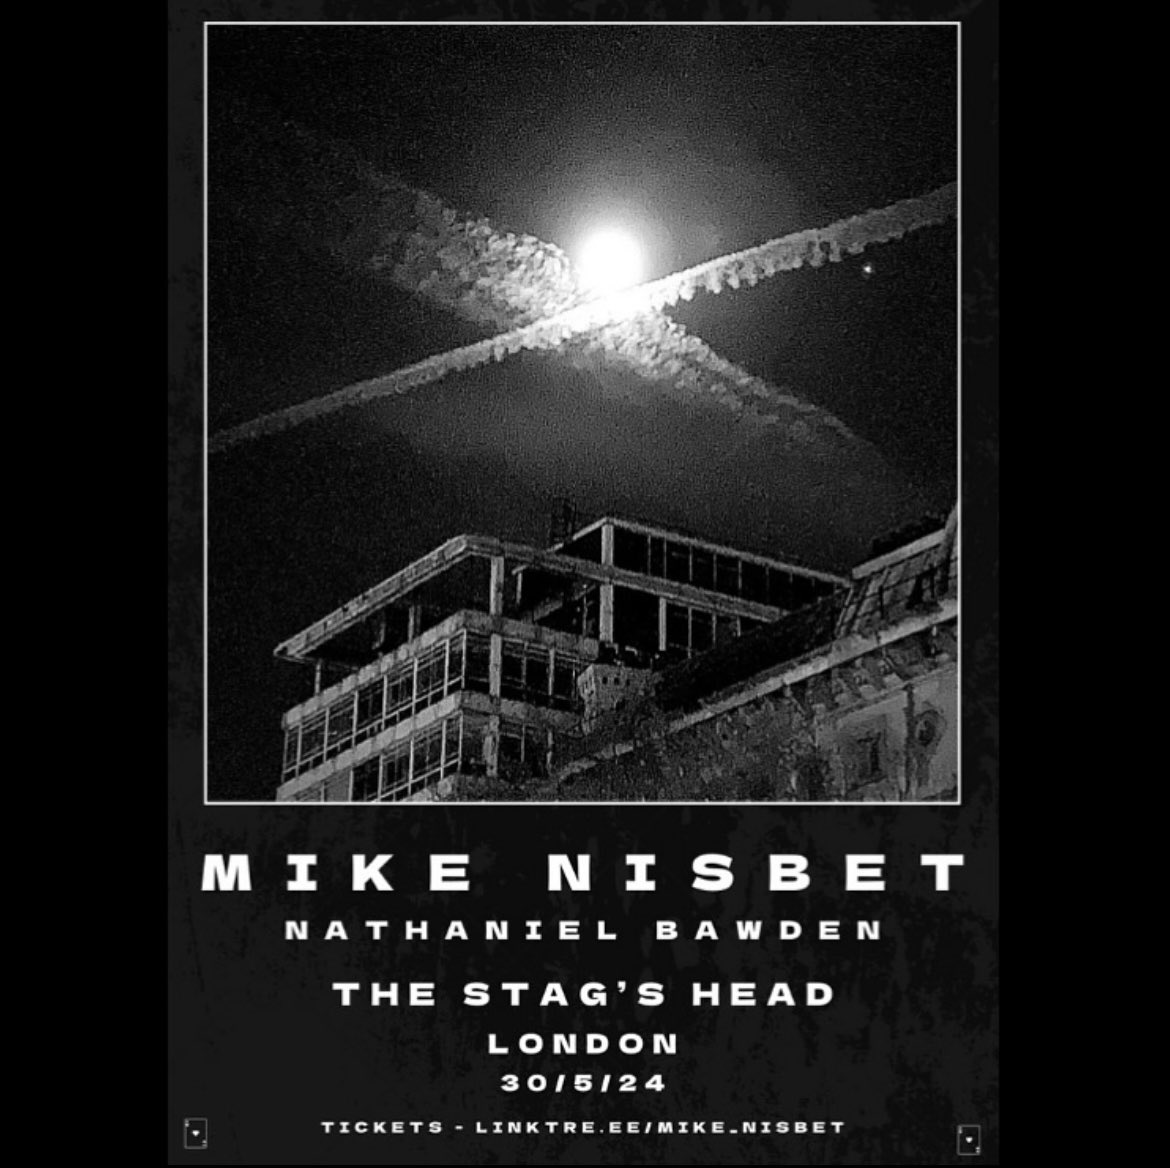 Very excited for my next show, supporting the superb @mike_nisbet on 30 May @ Stag’s Head, Hoxton 📯 tickets via link below… don’t miss this 🕺🏻🕺🏻 skiddle.com/whats-on/Londo… #London #Gig #Folk #SingerSongwriter